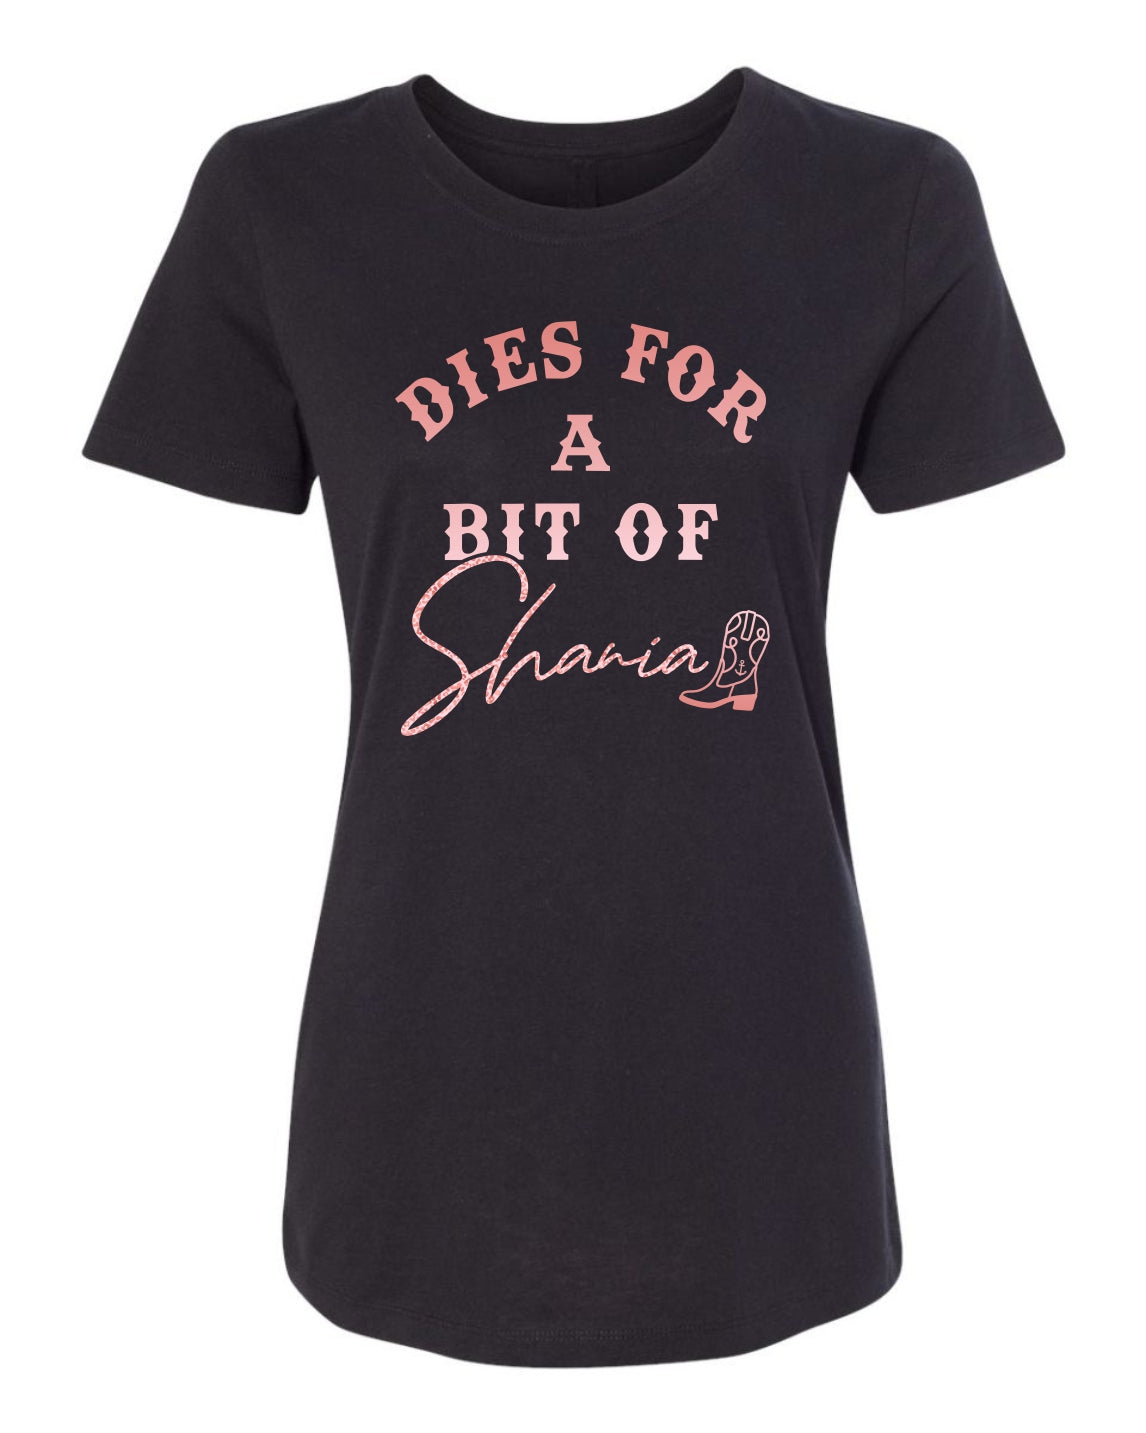 "Dies For A Bit Of Shania" T-Shirt